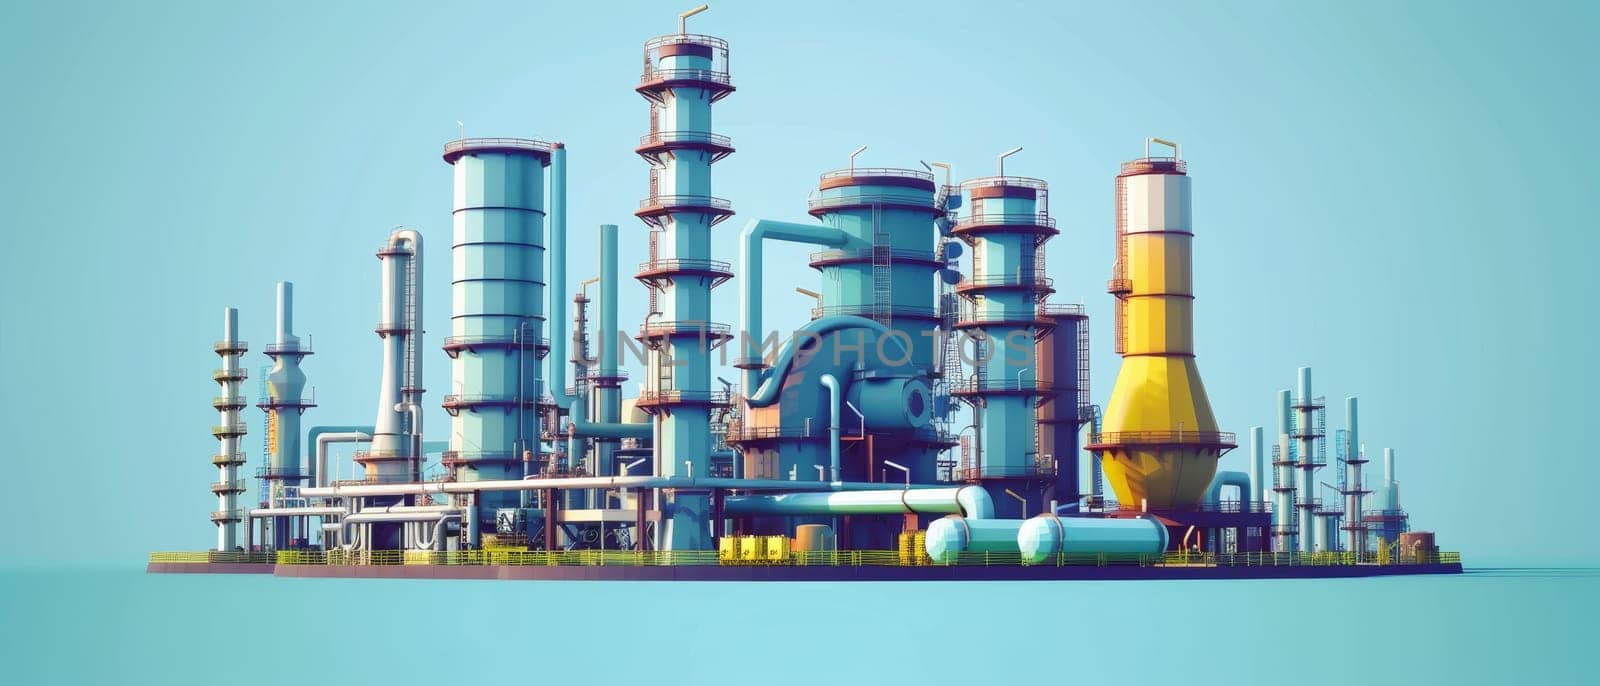 Digital illustration of an industrial plant with towering stacks and complex piping, rendered in a stylized colorful design. by sfinks